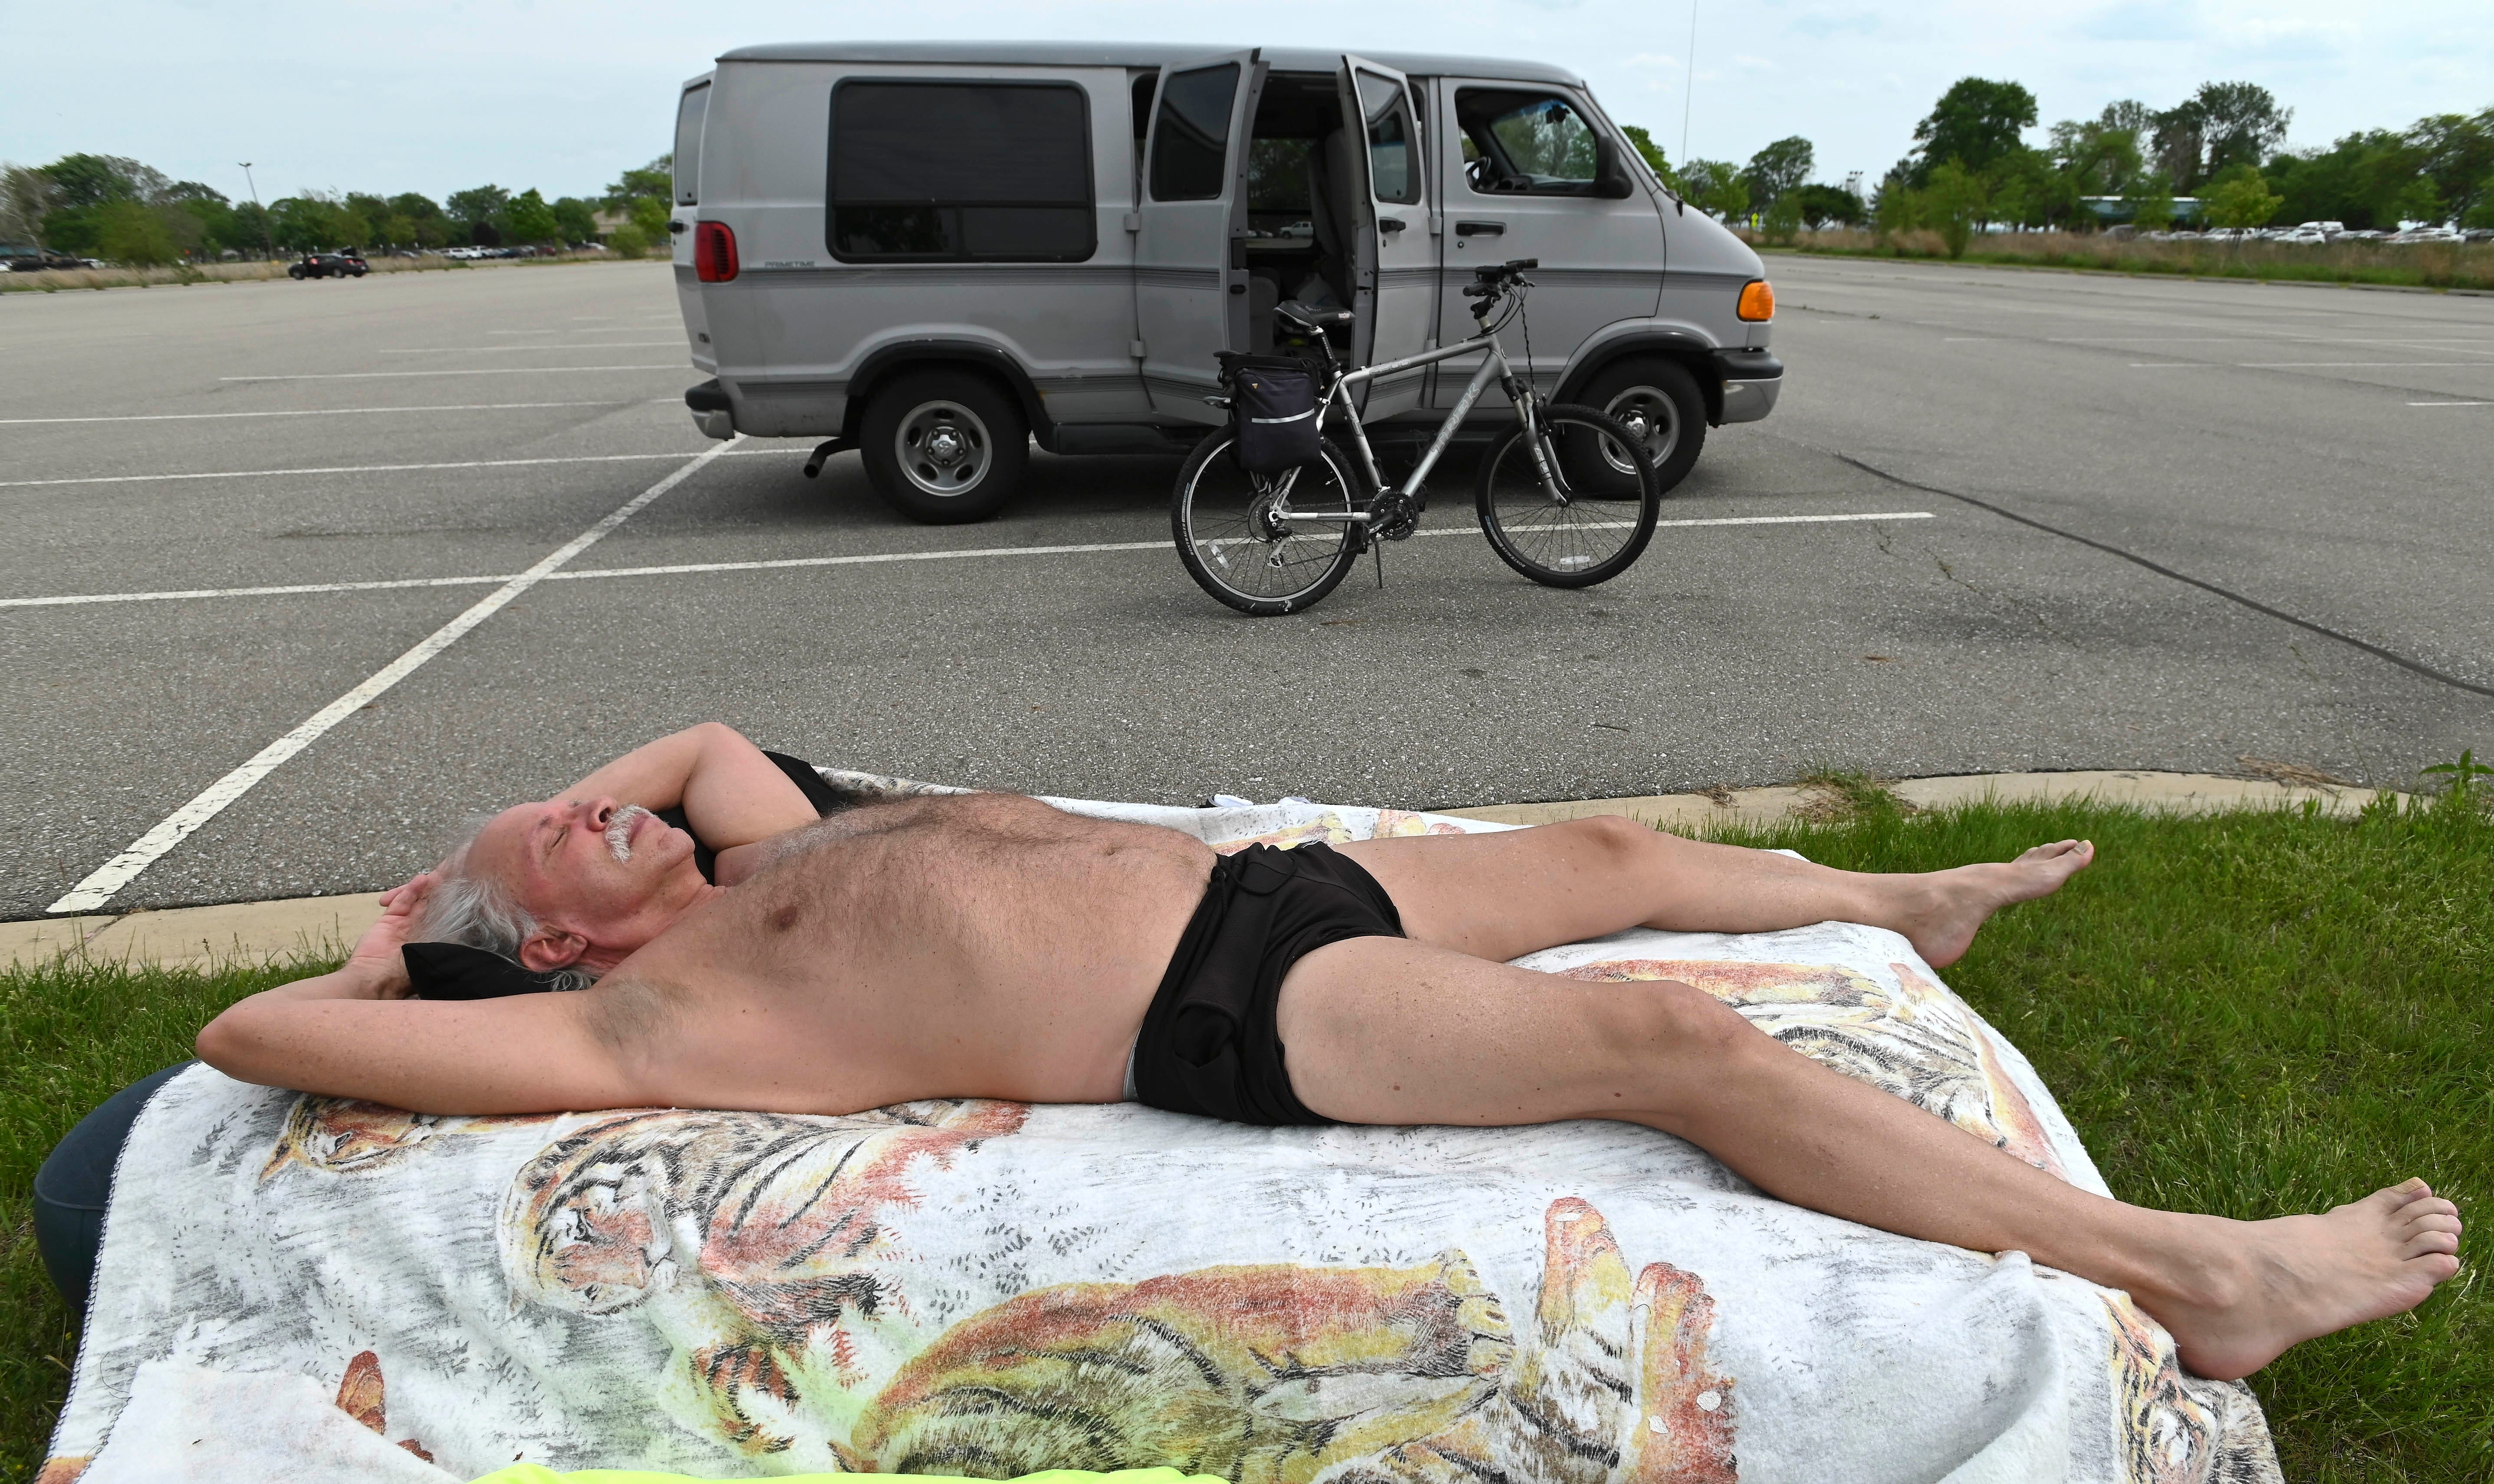 With temperatures in the mid to high 80s in Southeast Michigan, Joshua James of Macomb County sunbathes before riding his bike at Lake St. Clair Metropark in Harrison Township Tuesday afternoon, May 25, 2021.